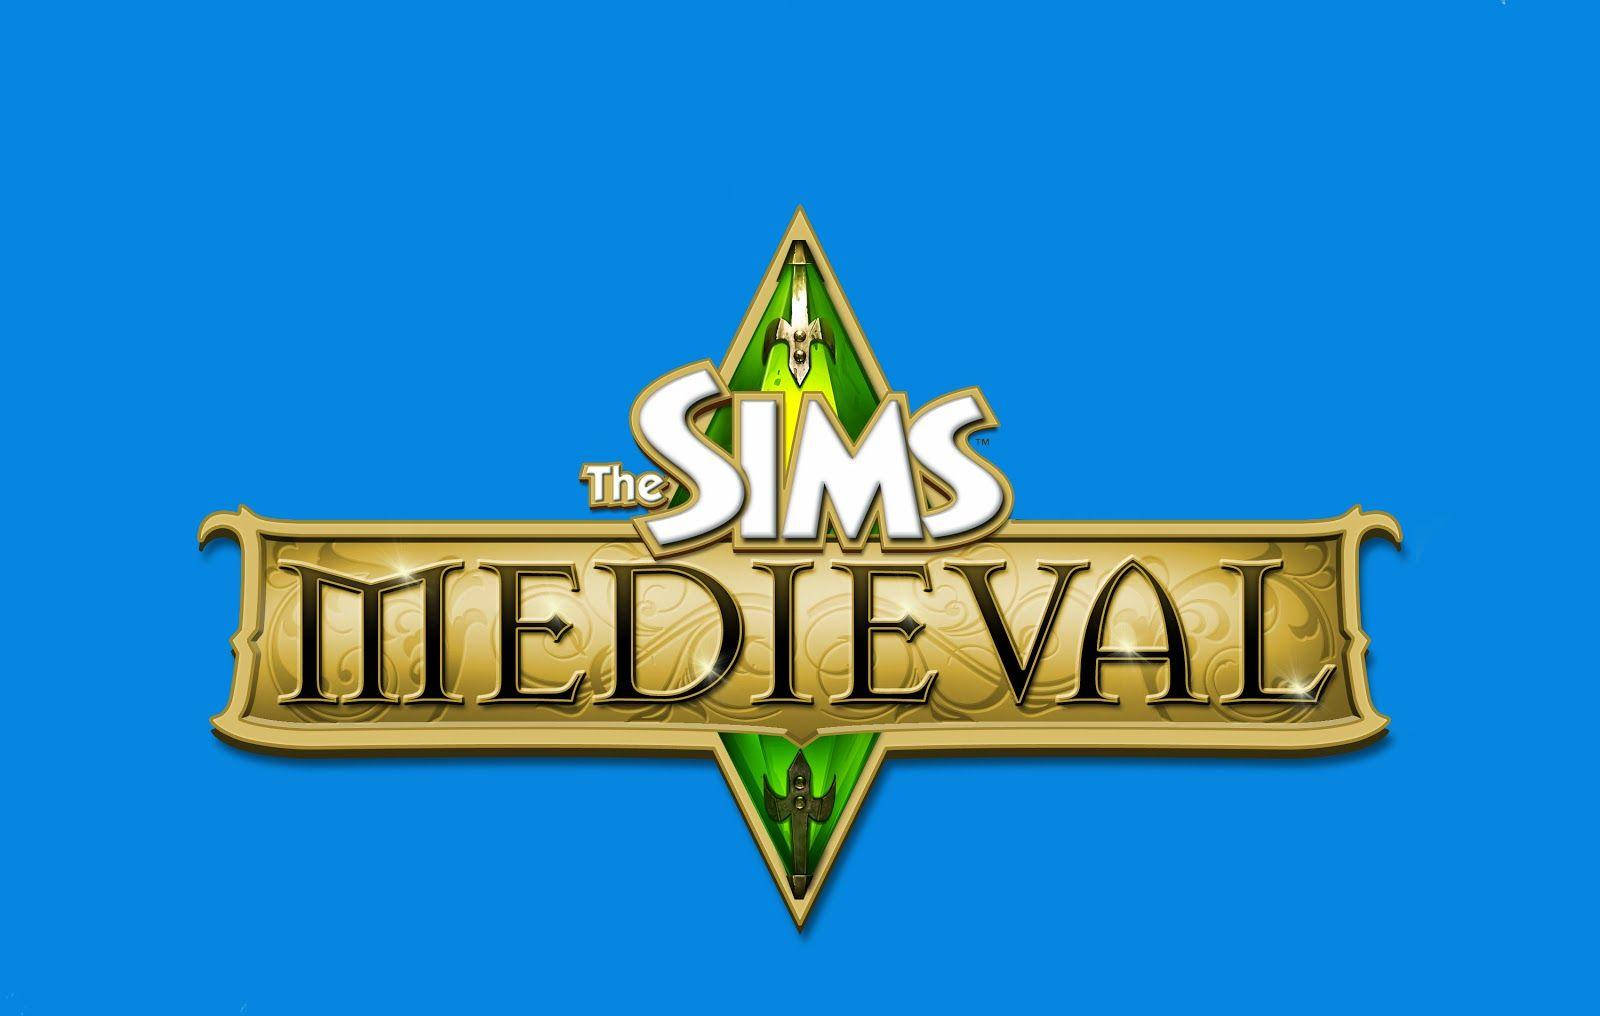 The Sims Medieval Logo Wallpaper